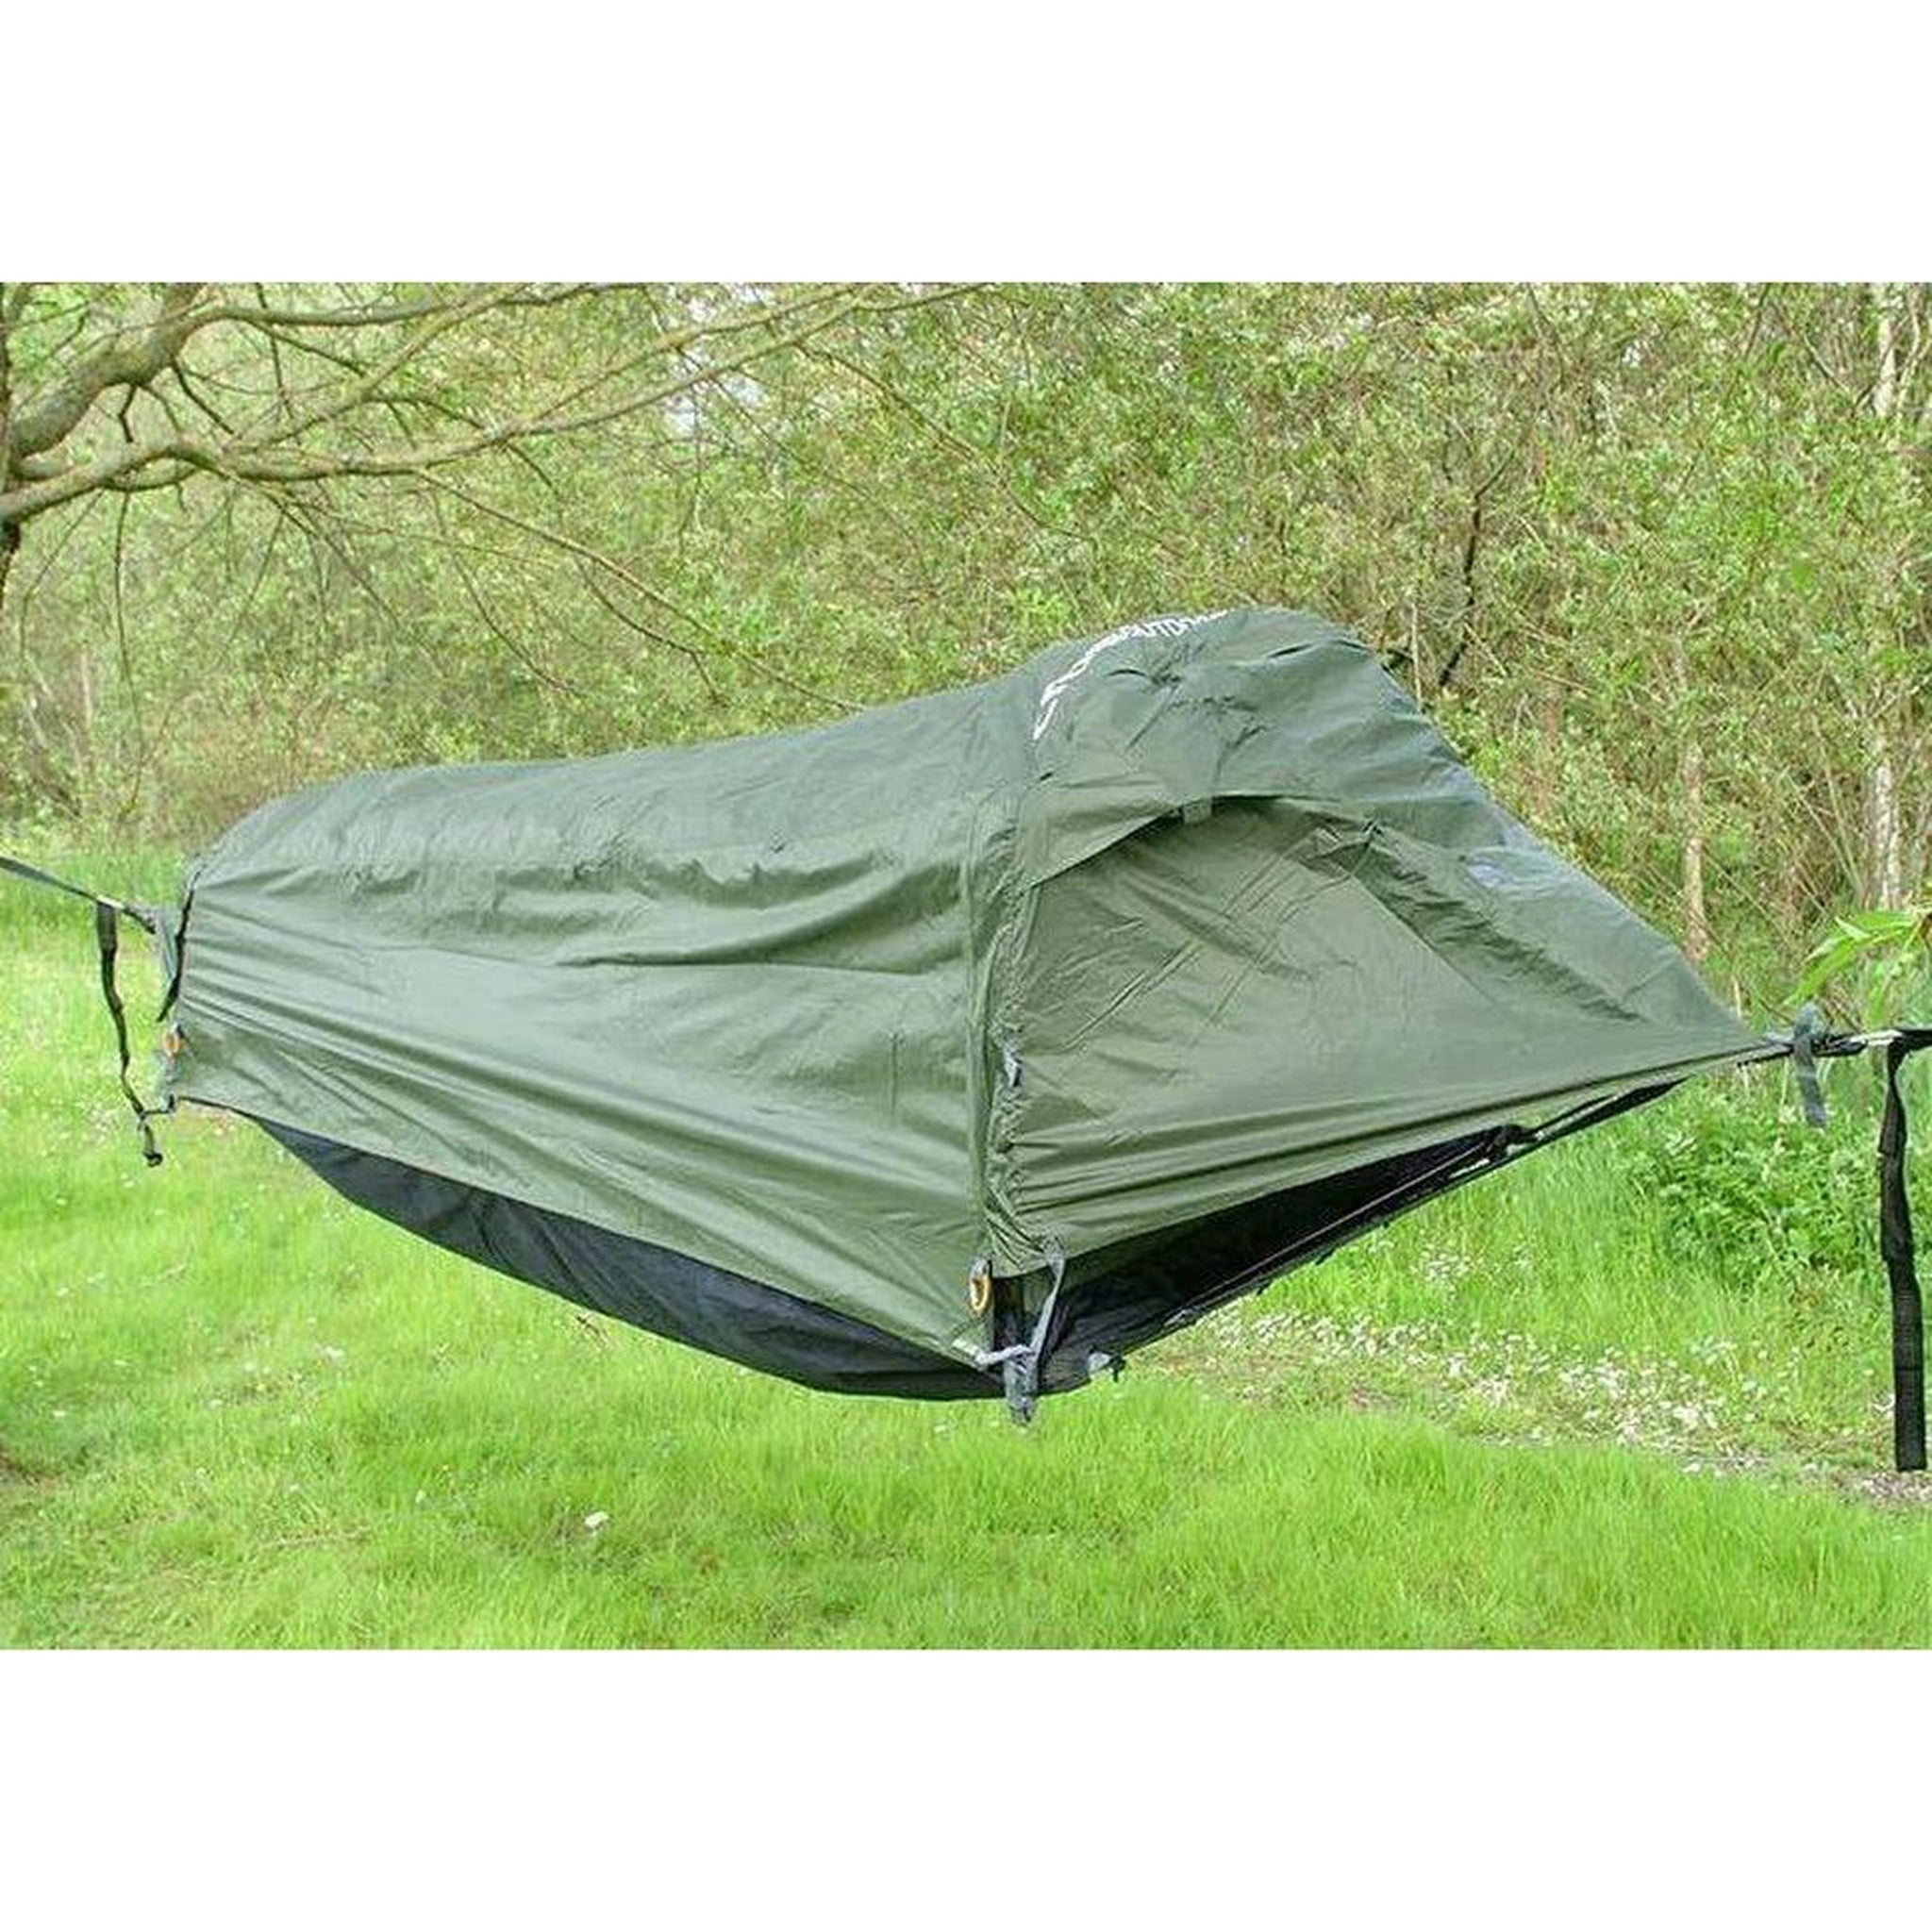 Crua Hybrid - 1 Person Tent/hammock Only Tent